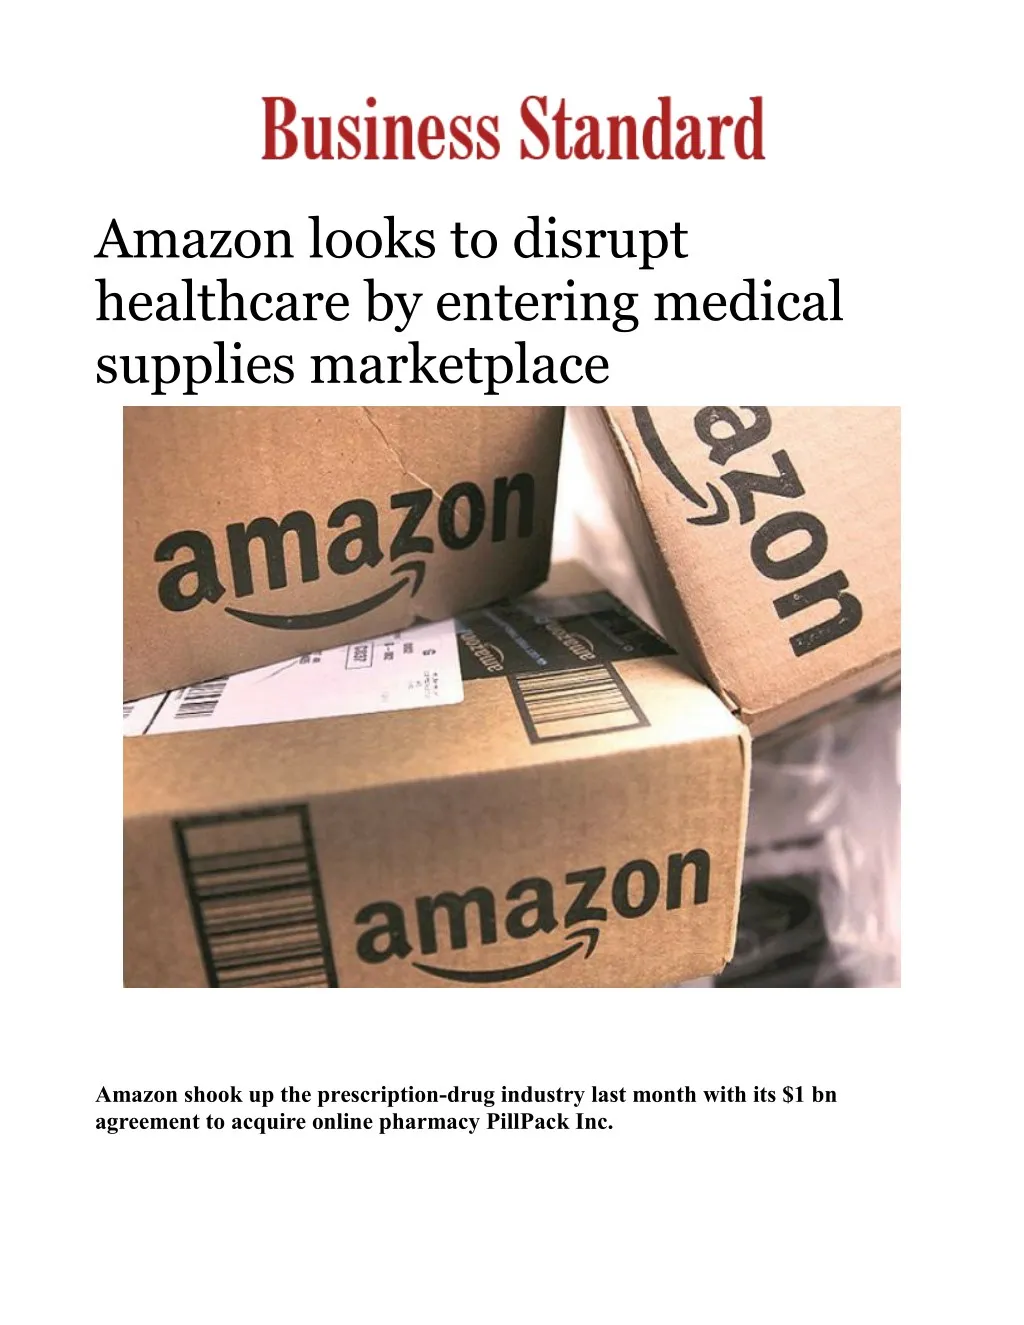 amazon looks to disrupt healthcare by entering